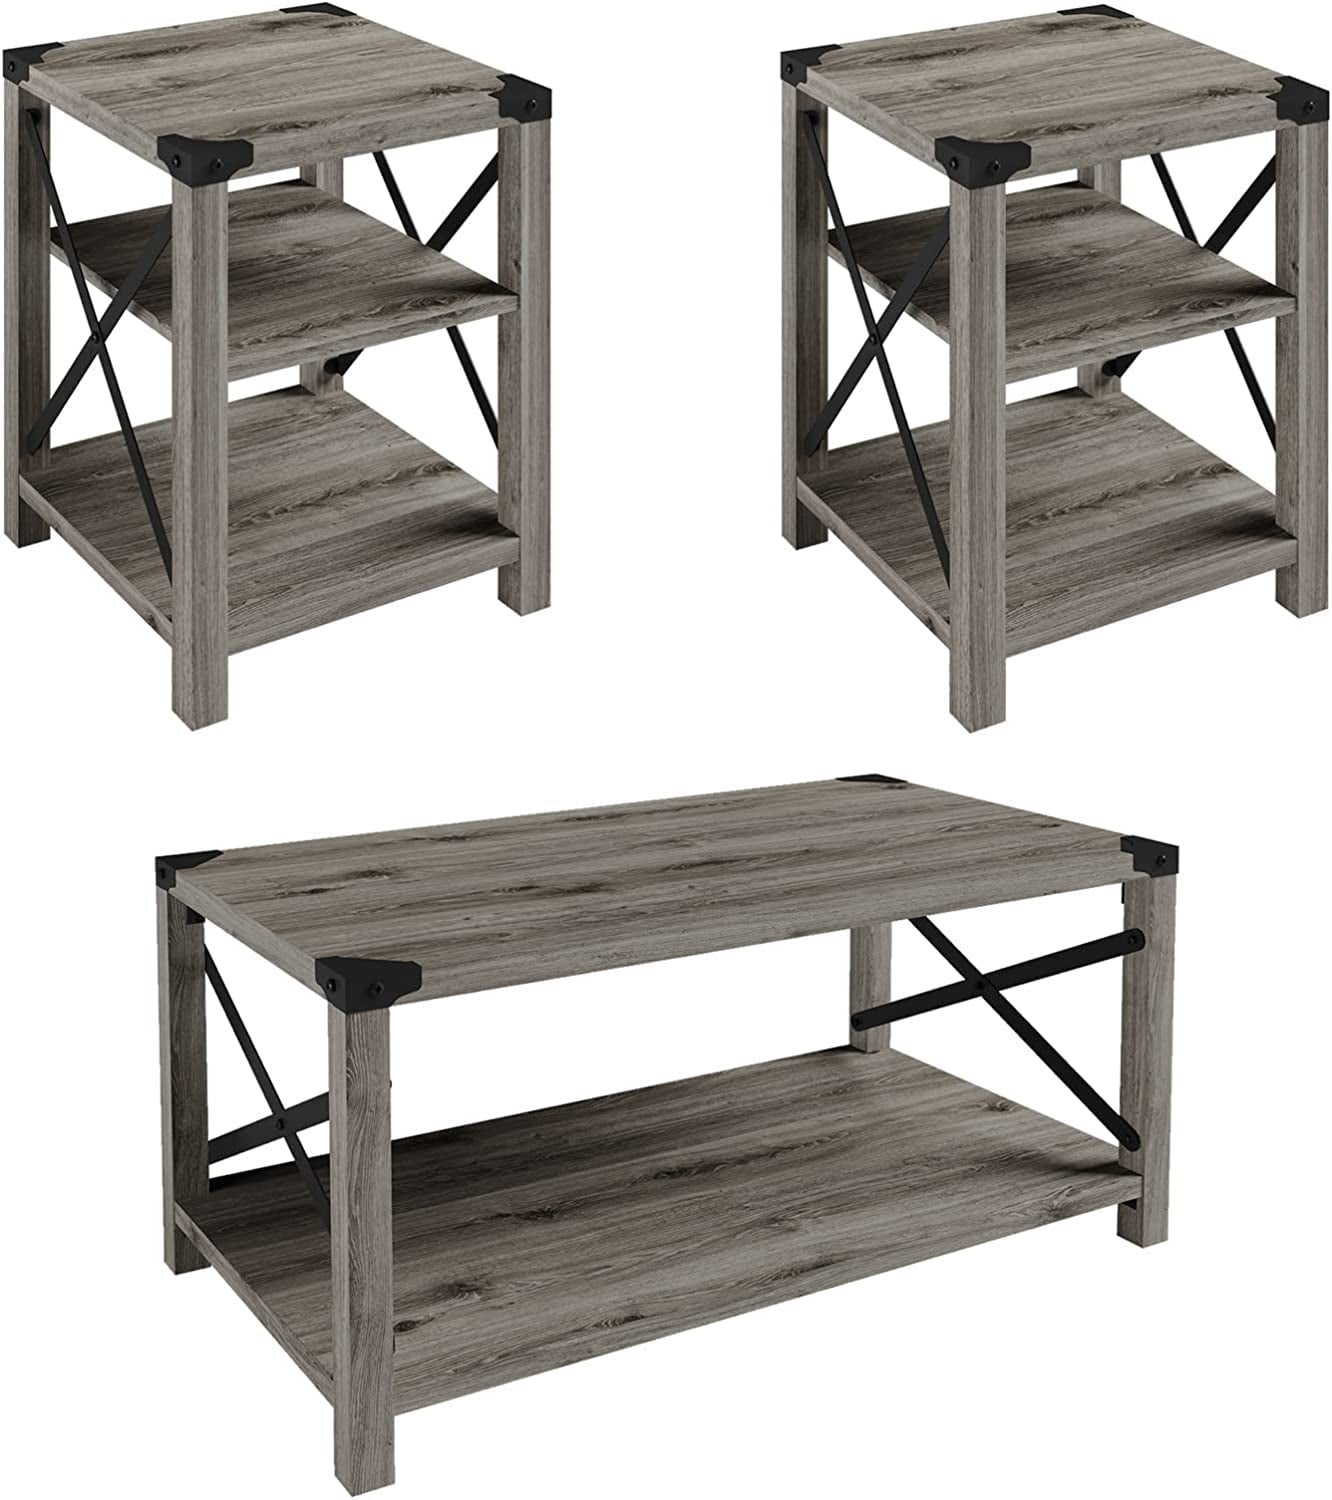 AMERLIFE 3 Pieces Farmhouse Table Set - Includes Coffee Table & Two End ...